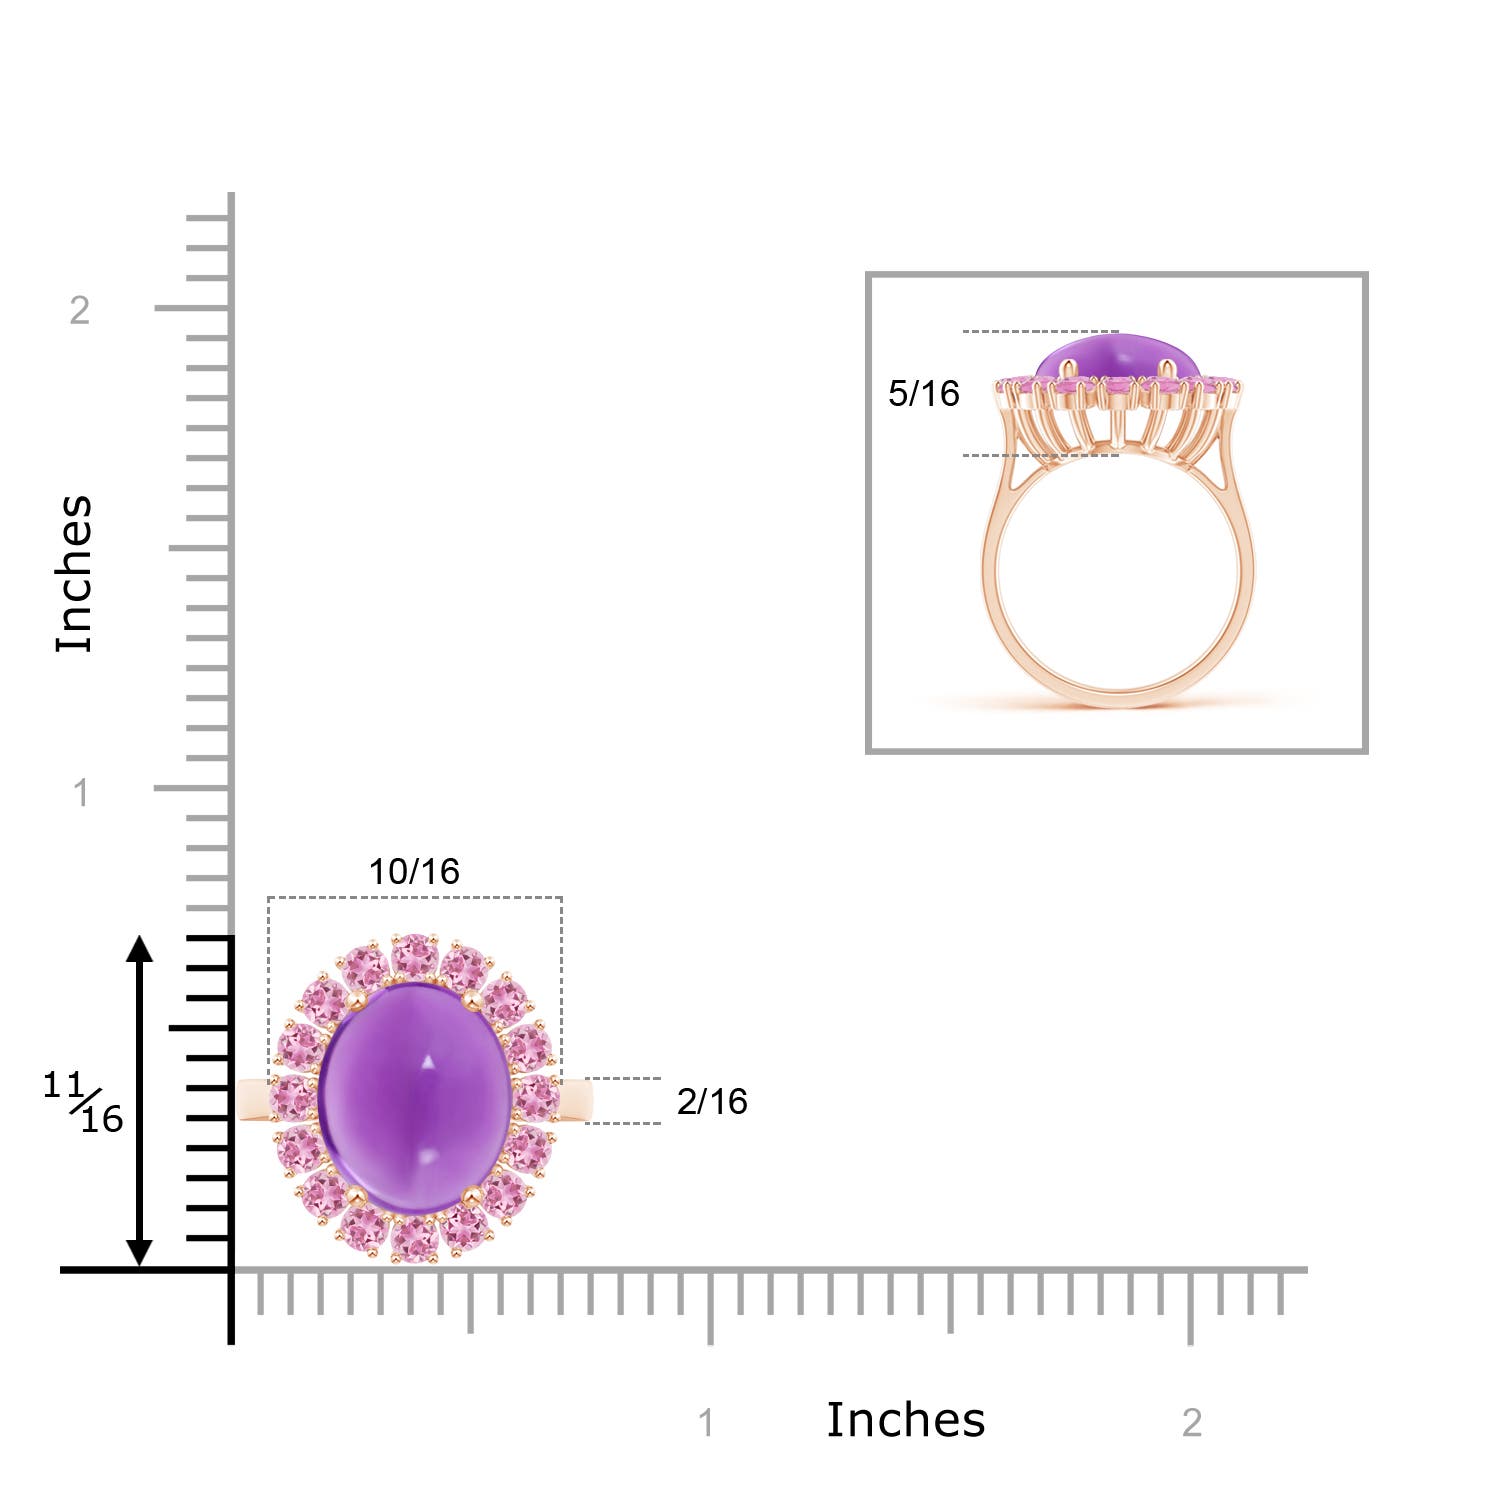 AA - Amethyst / 7.26 CT / 14 KT Rose Gold